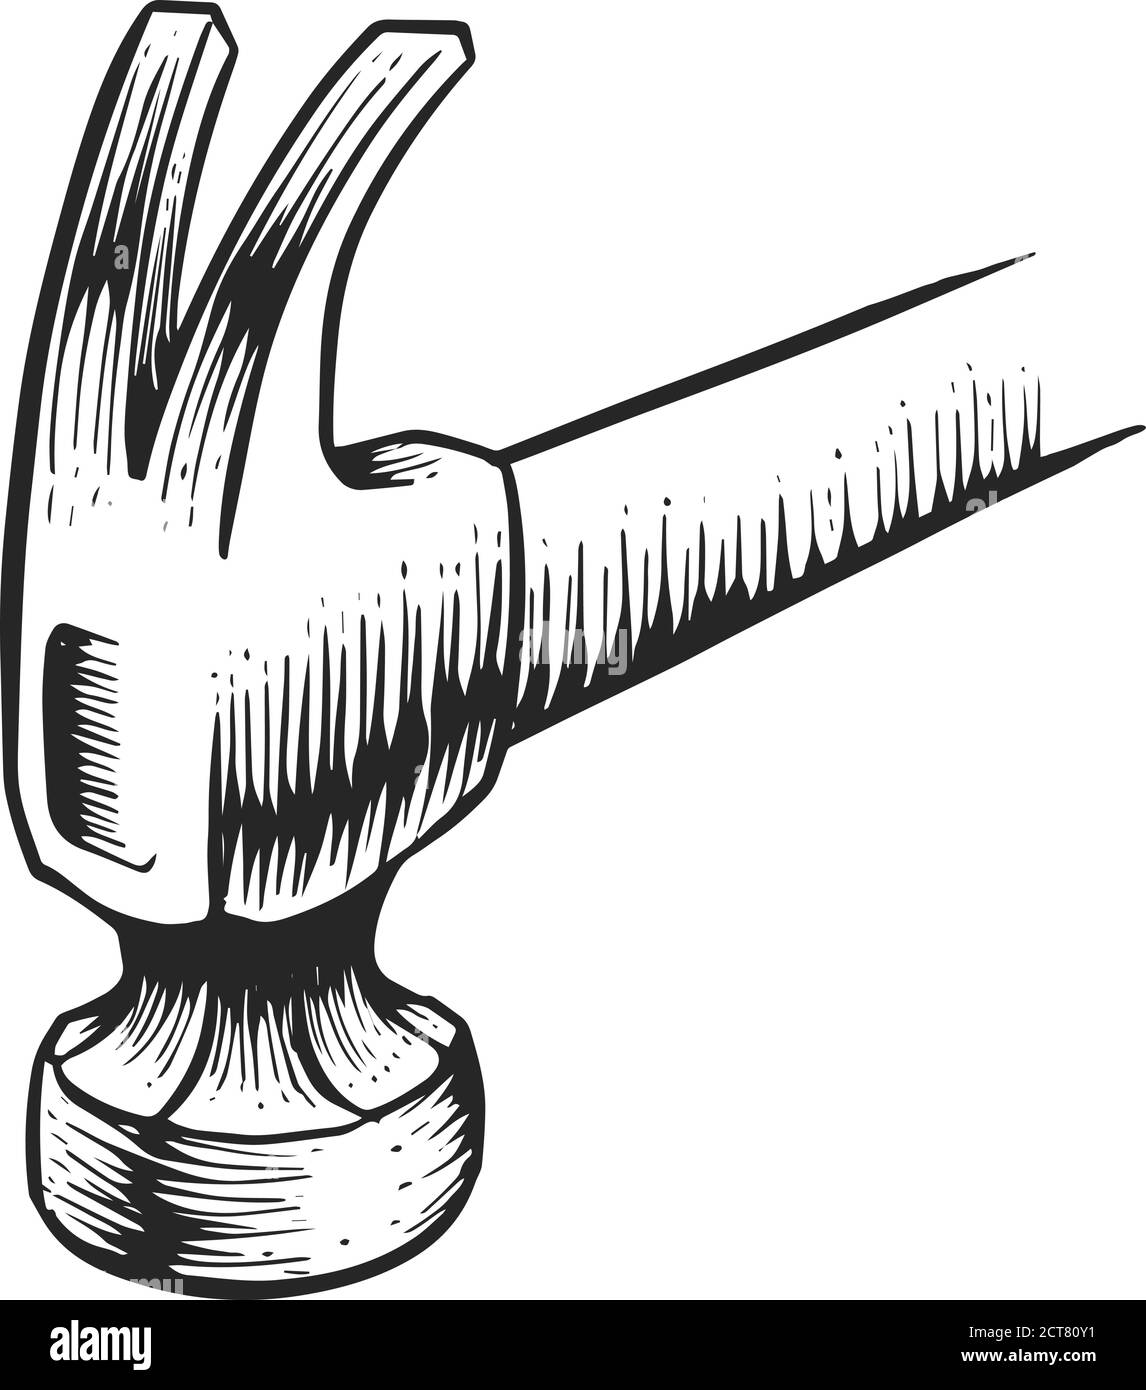 An illustration of a claw hammer, which is most commonly employed for